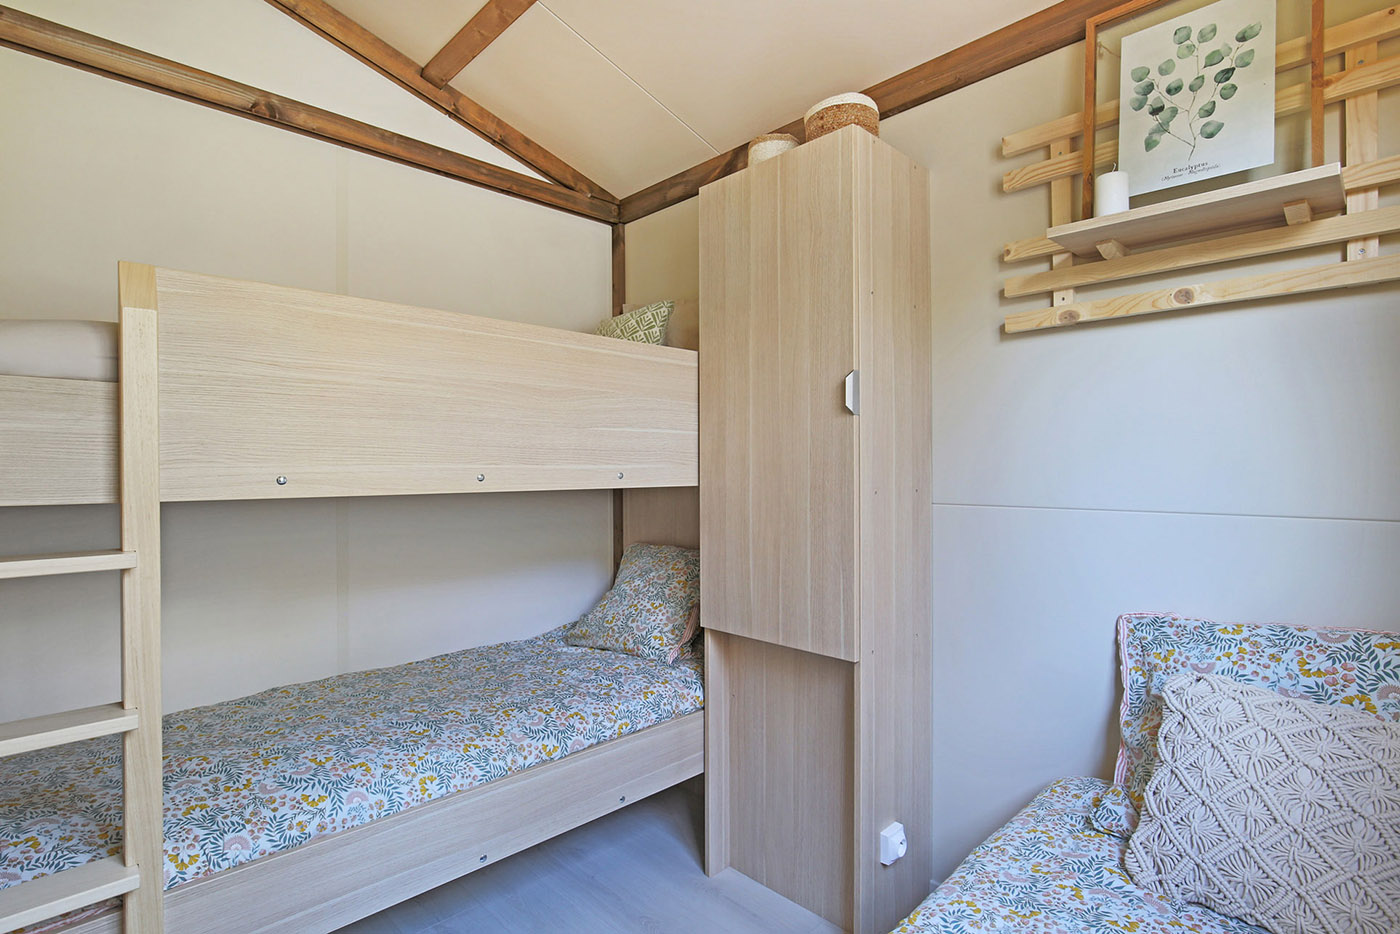 Chalet 4/5 personnes - 2 chambres